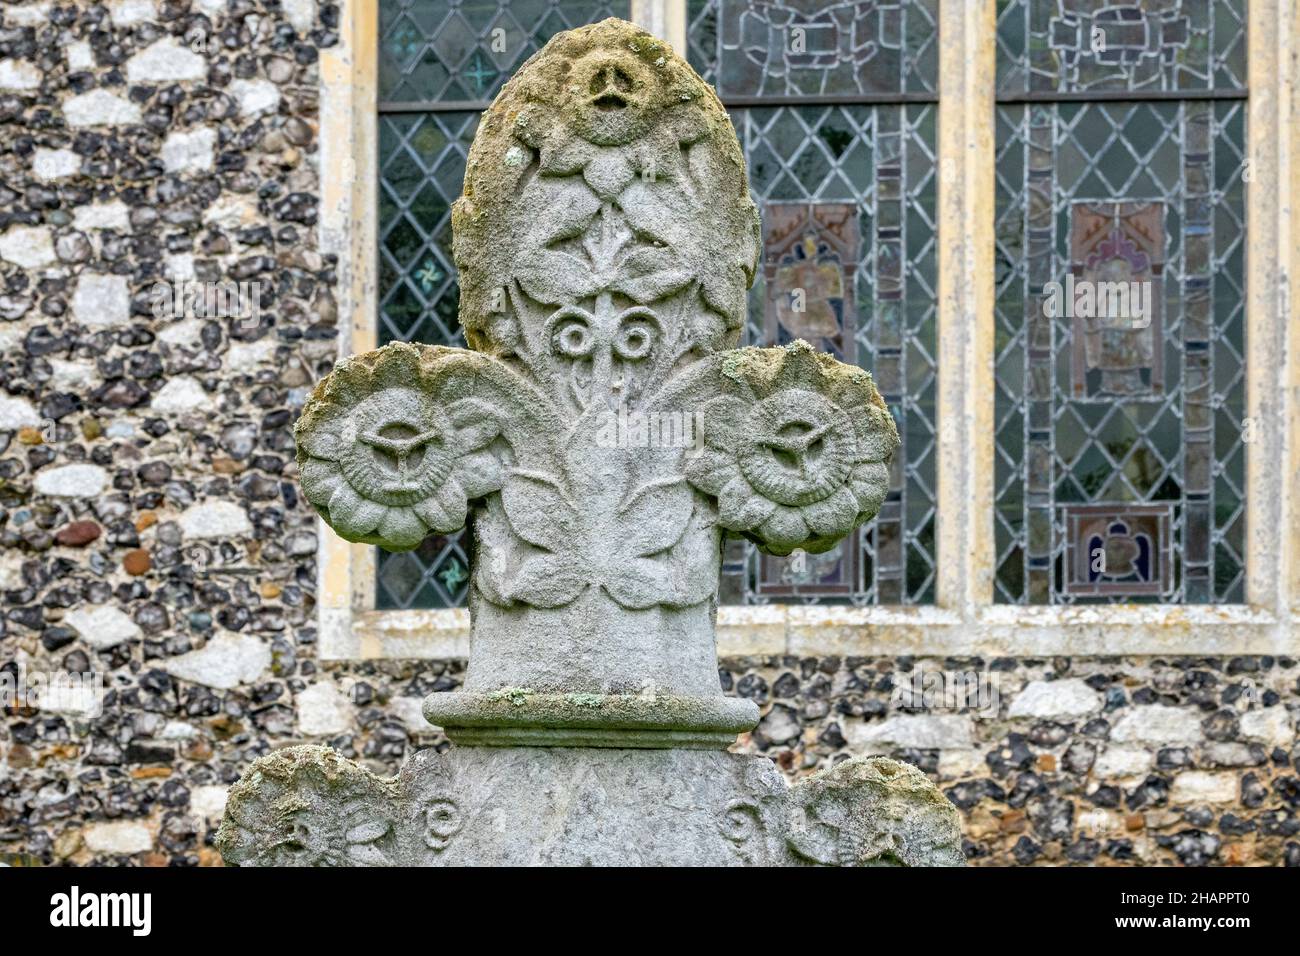 Exterior window detail with carved headstone in the foreground at the Church of St Mary of the Assumption, Ufford, Suffolk Stock Photo